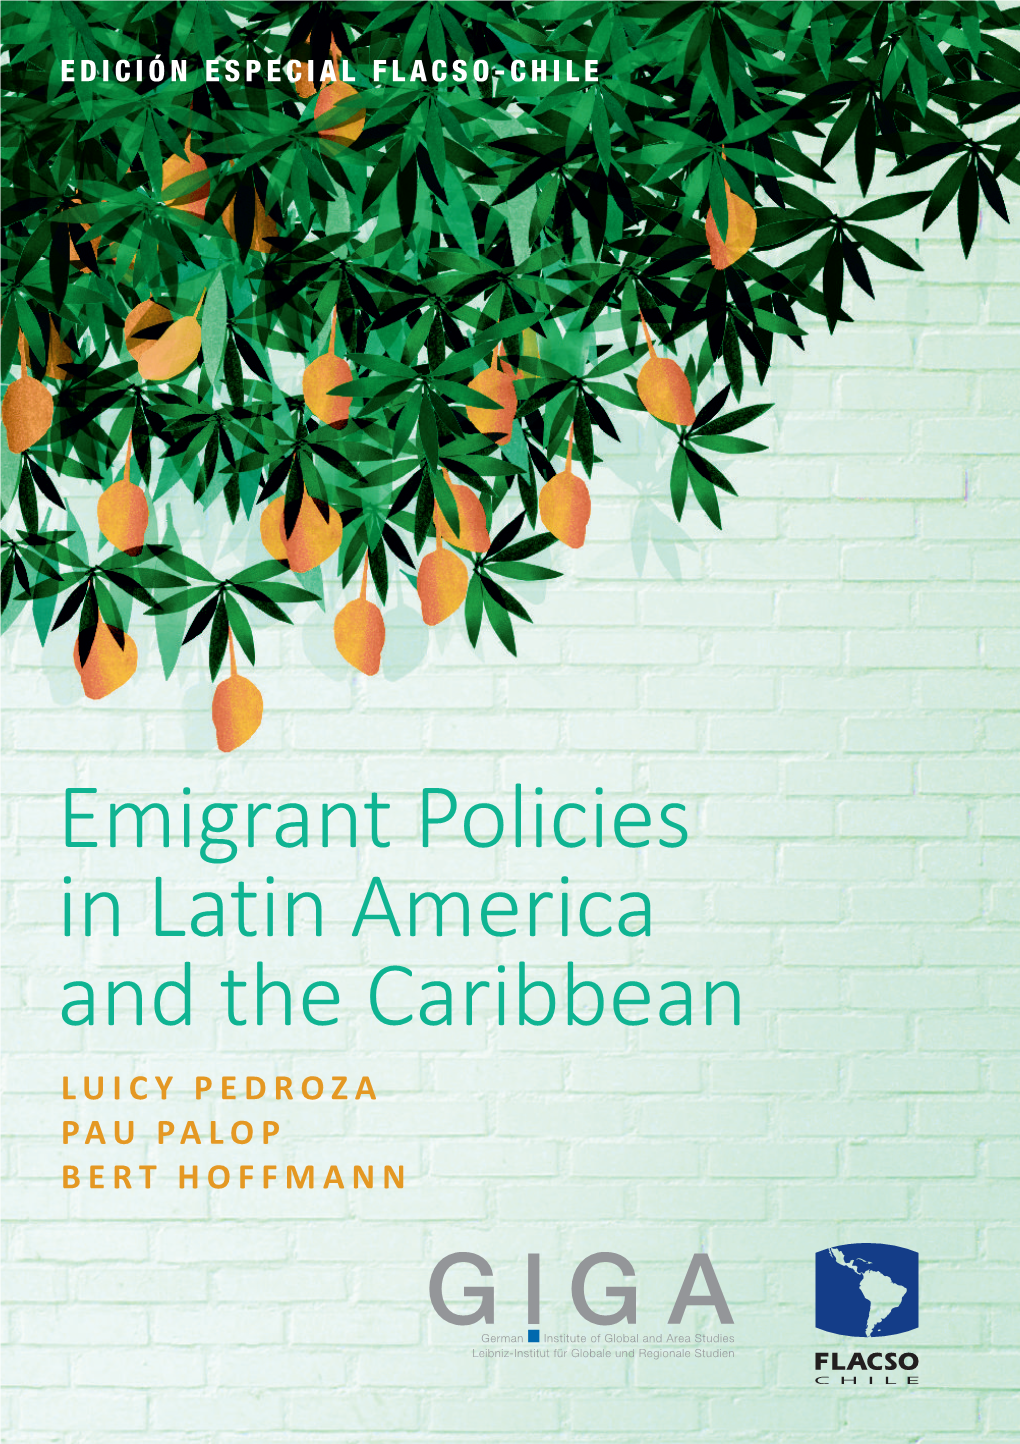 Emigrant Policies in Latin America and the Caribbean